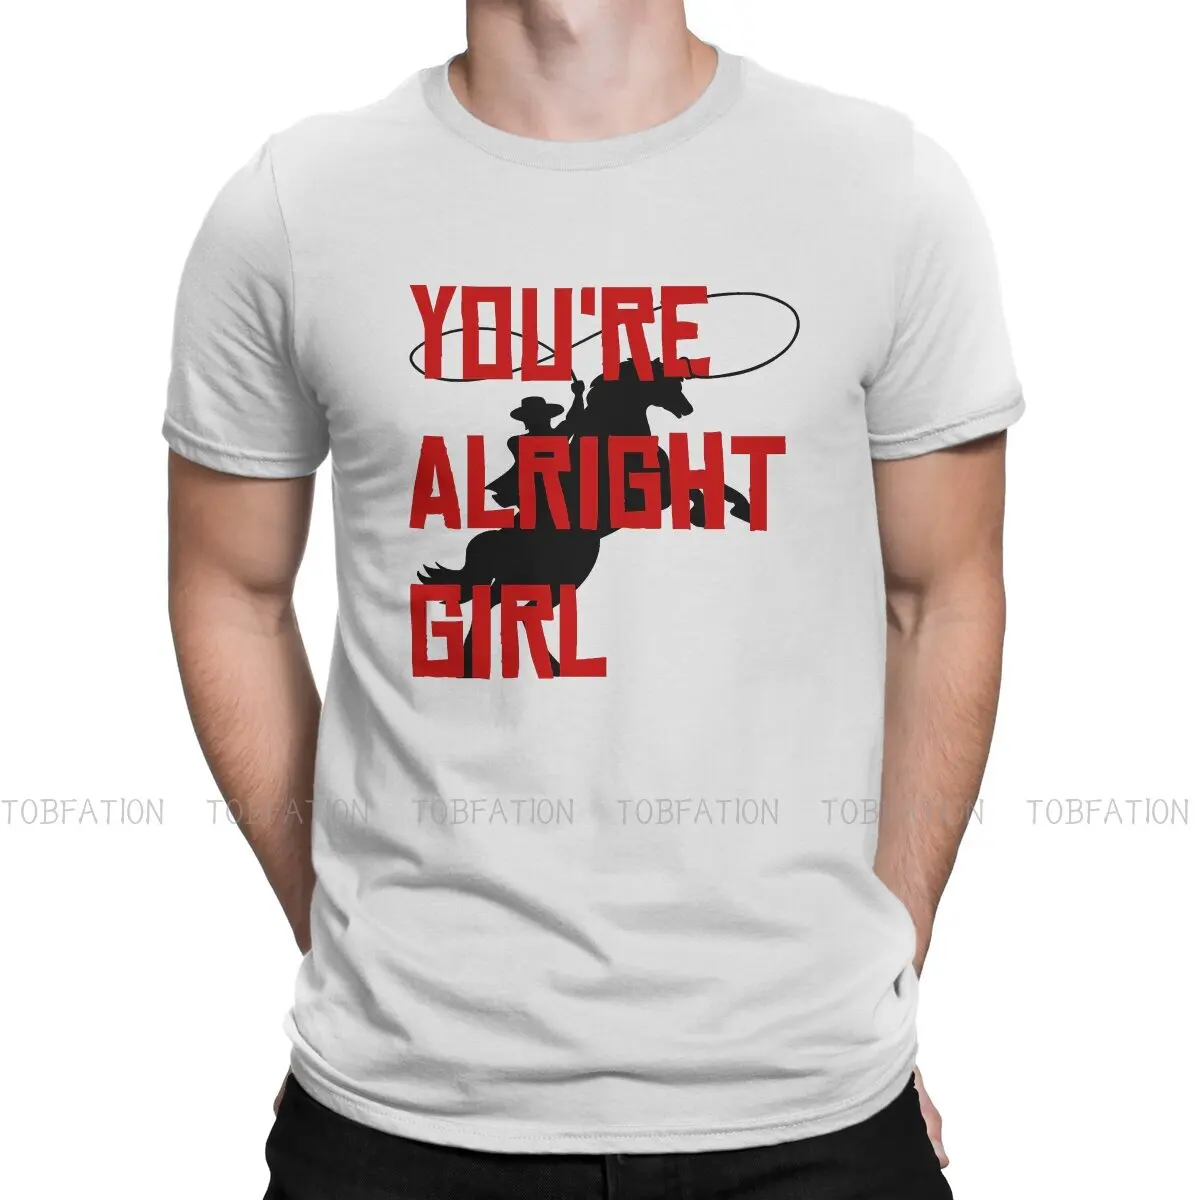 

Red Dead Redemption 100% Cotton TShirts You're Alright Girl Personalize Men's T Shirt Hipster Tops Size S-6XL